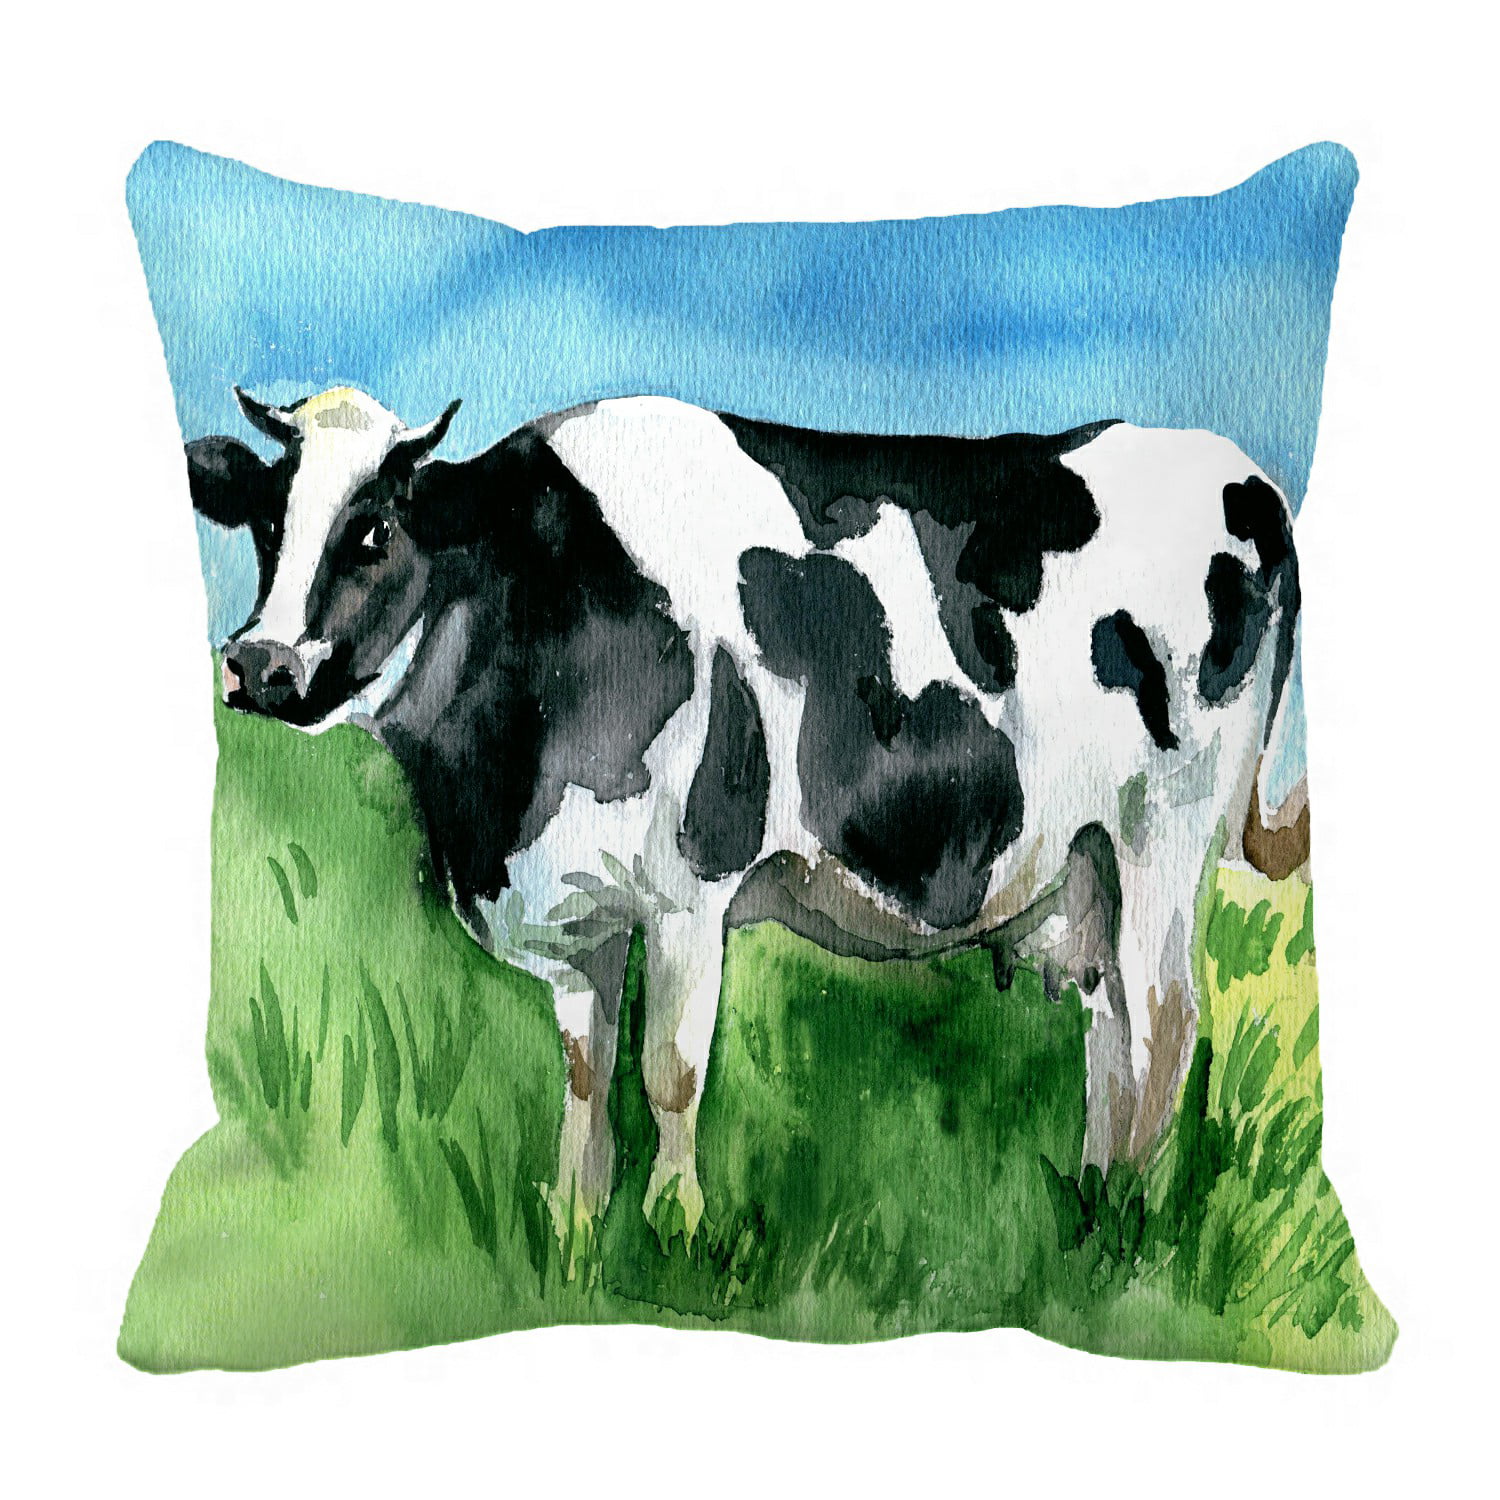 On The Farm Faux Suede or Cotton Canvas Cushion with Friesian Cow Farm Animal Print in Linen